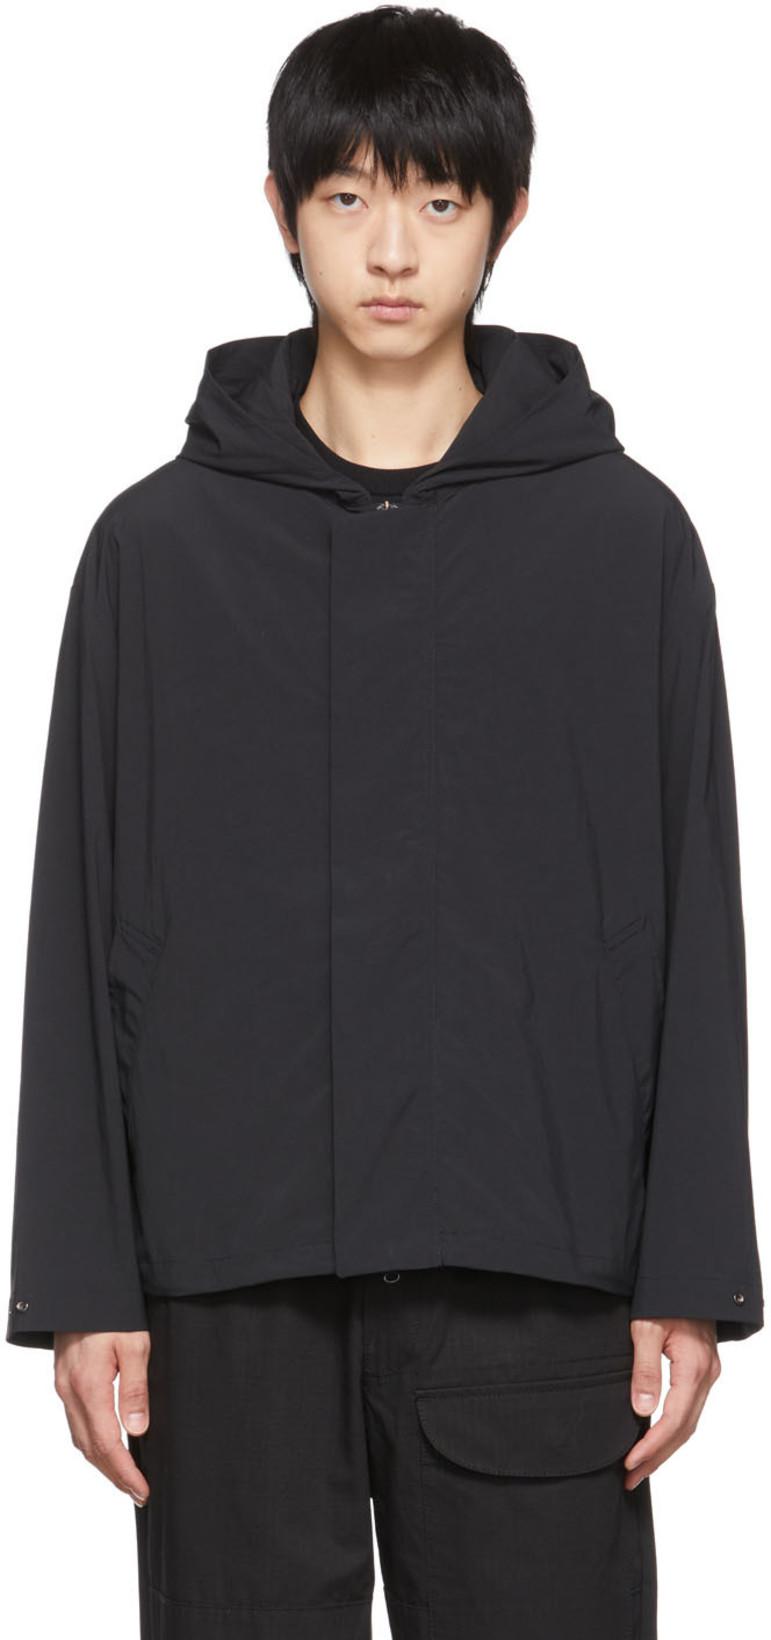 Black Polyester Jacket by DESCENTE A LL TE RR AI N